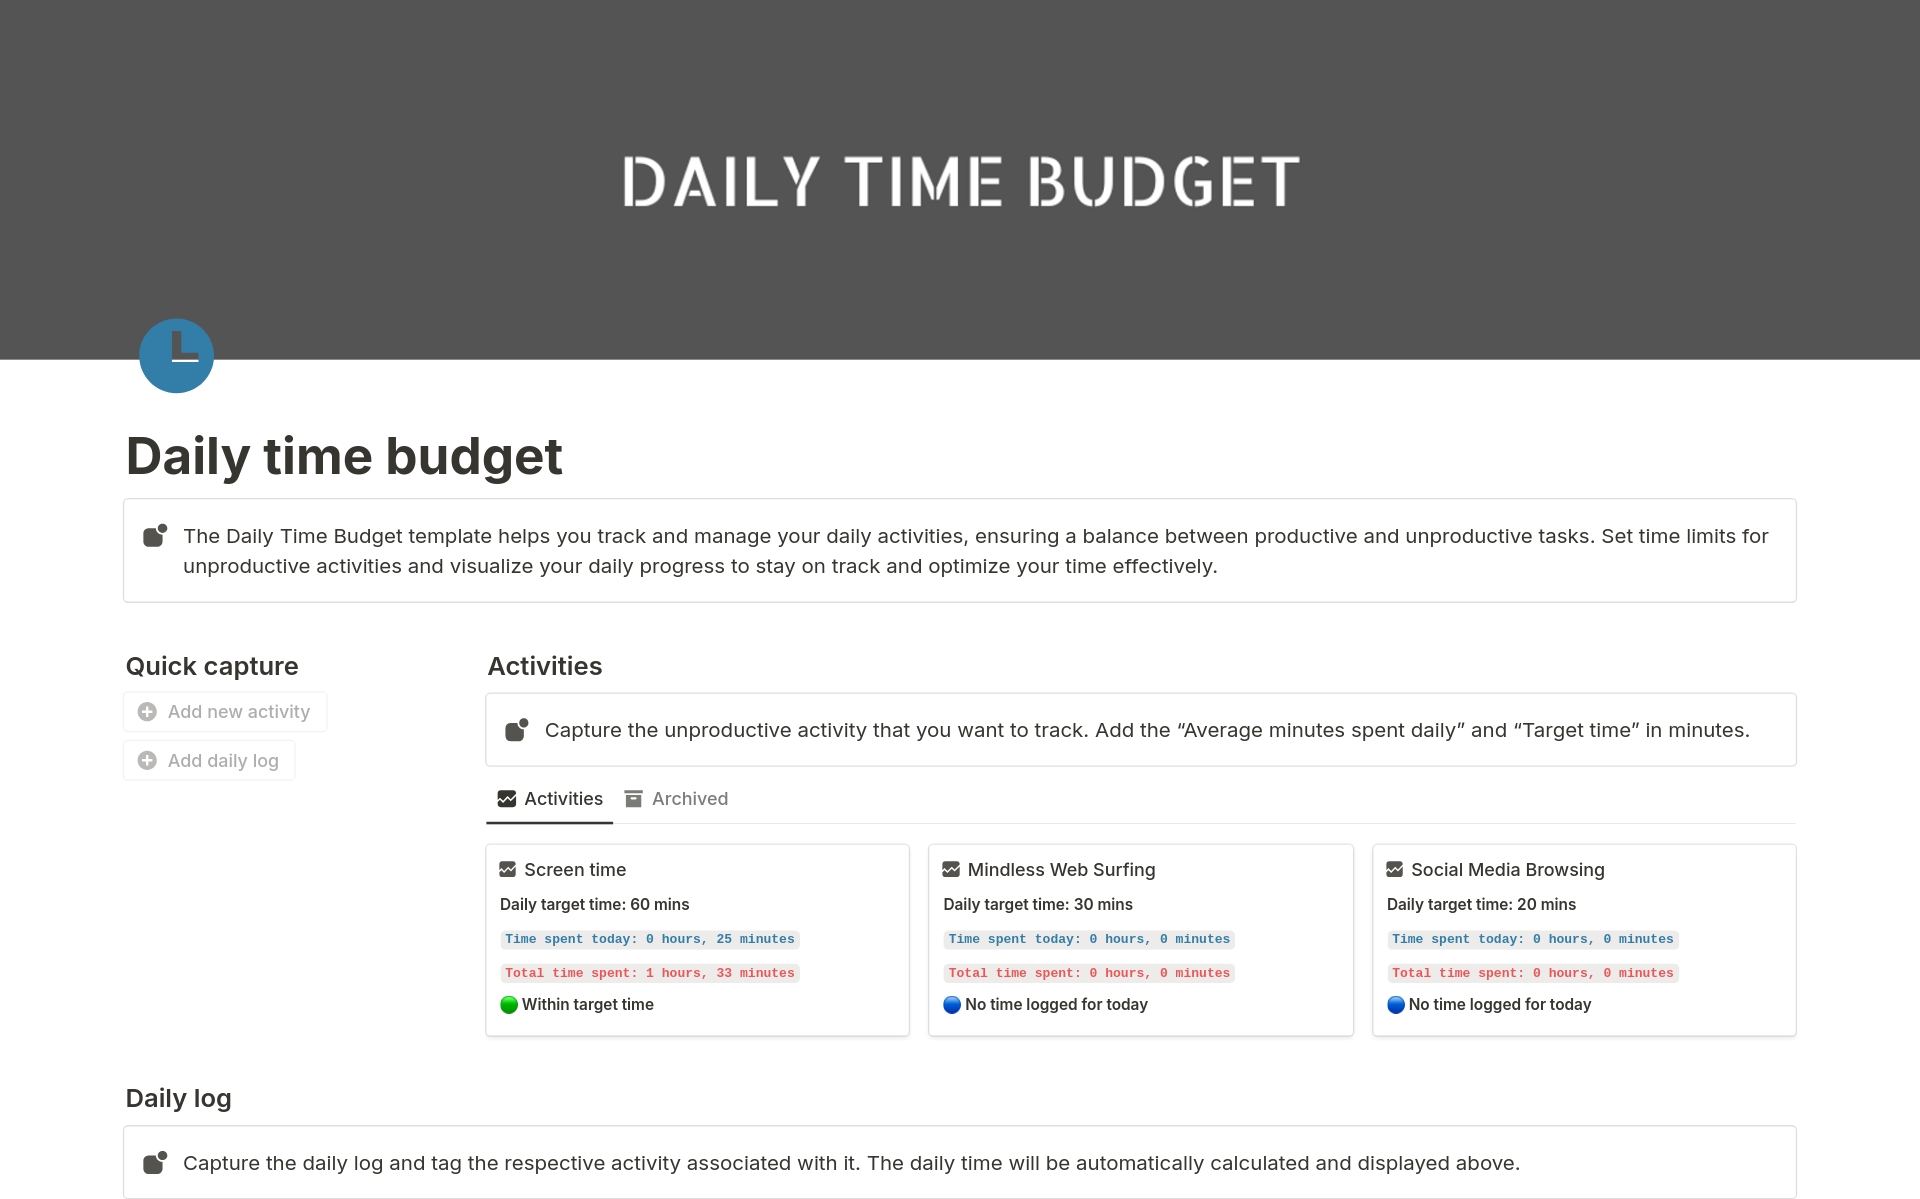 The Daily Time Budget template helps you track and manage your daily activities, ensuring a balance between productive and unproductive tasks. Set time limits for unproductive activities and visualize your daily progress to stay on track and optimize your time effectively.